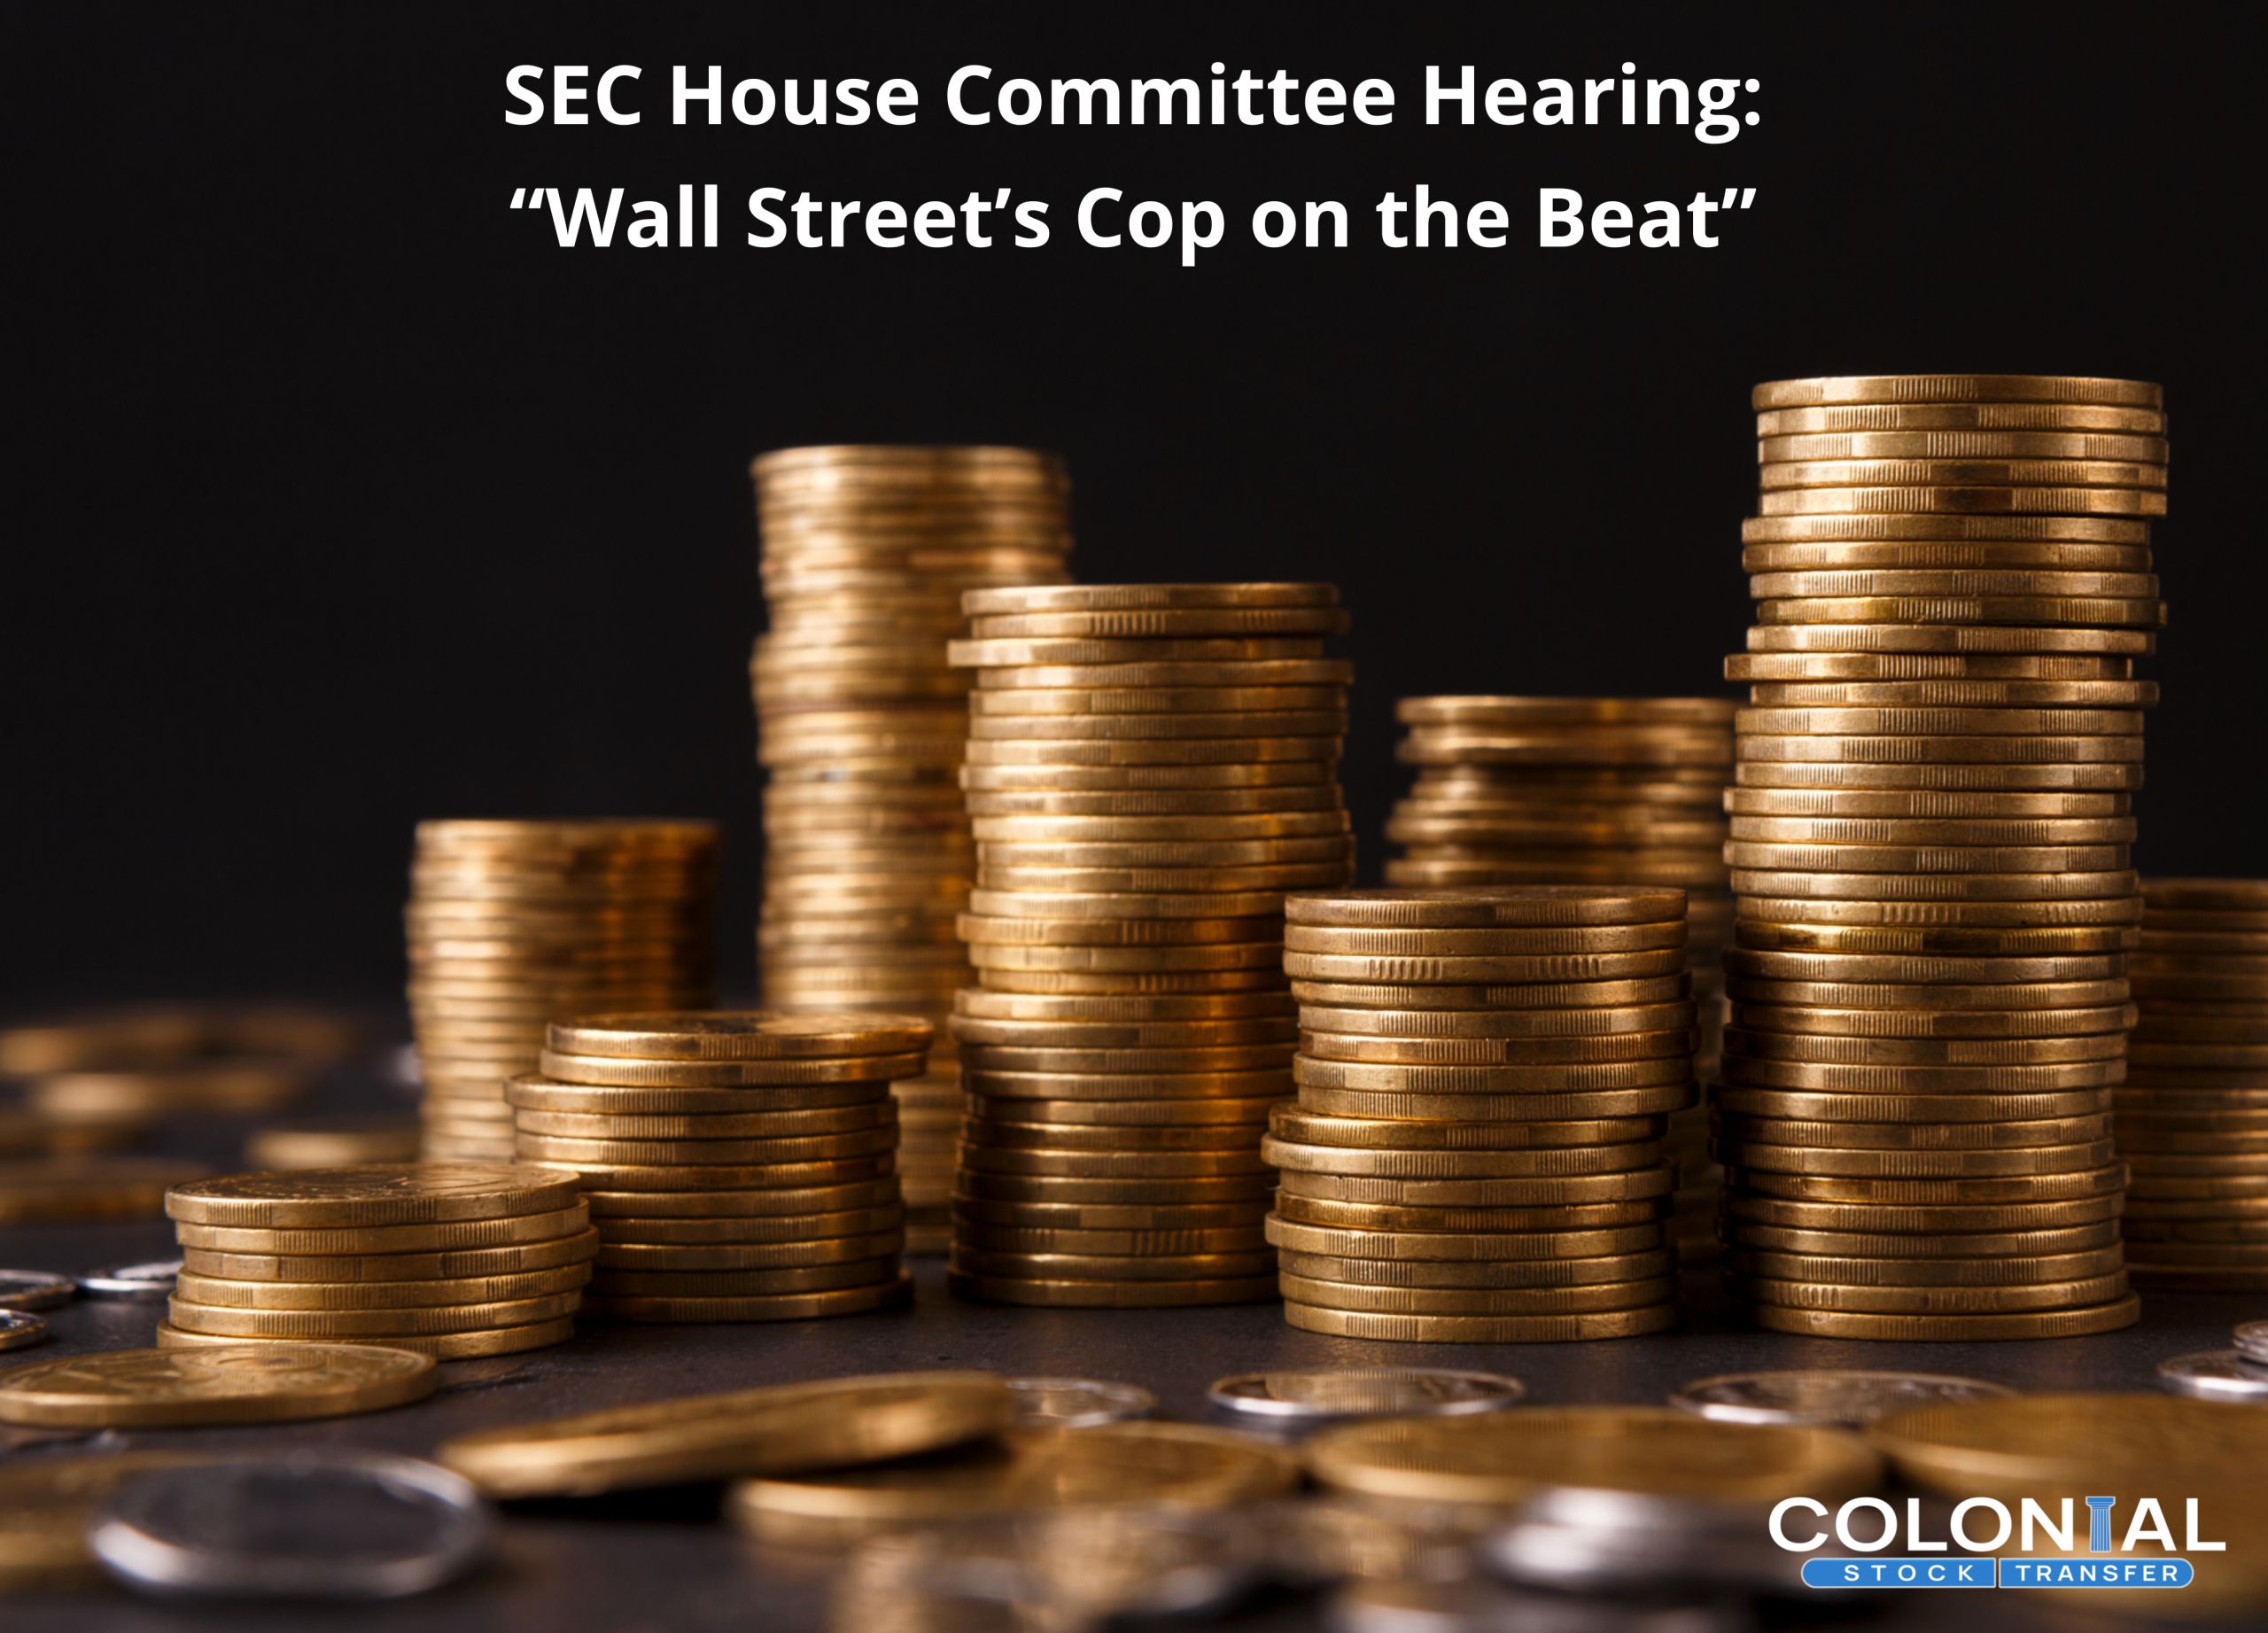 SEC House Committee Hearing: “Wall Street’s Cop on the Beat”